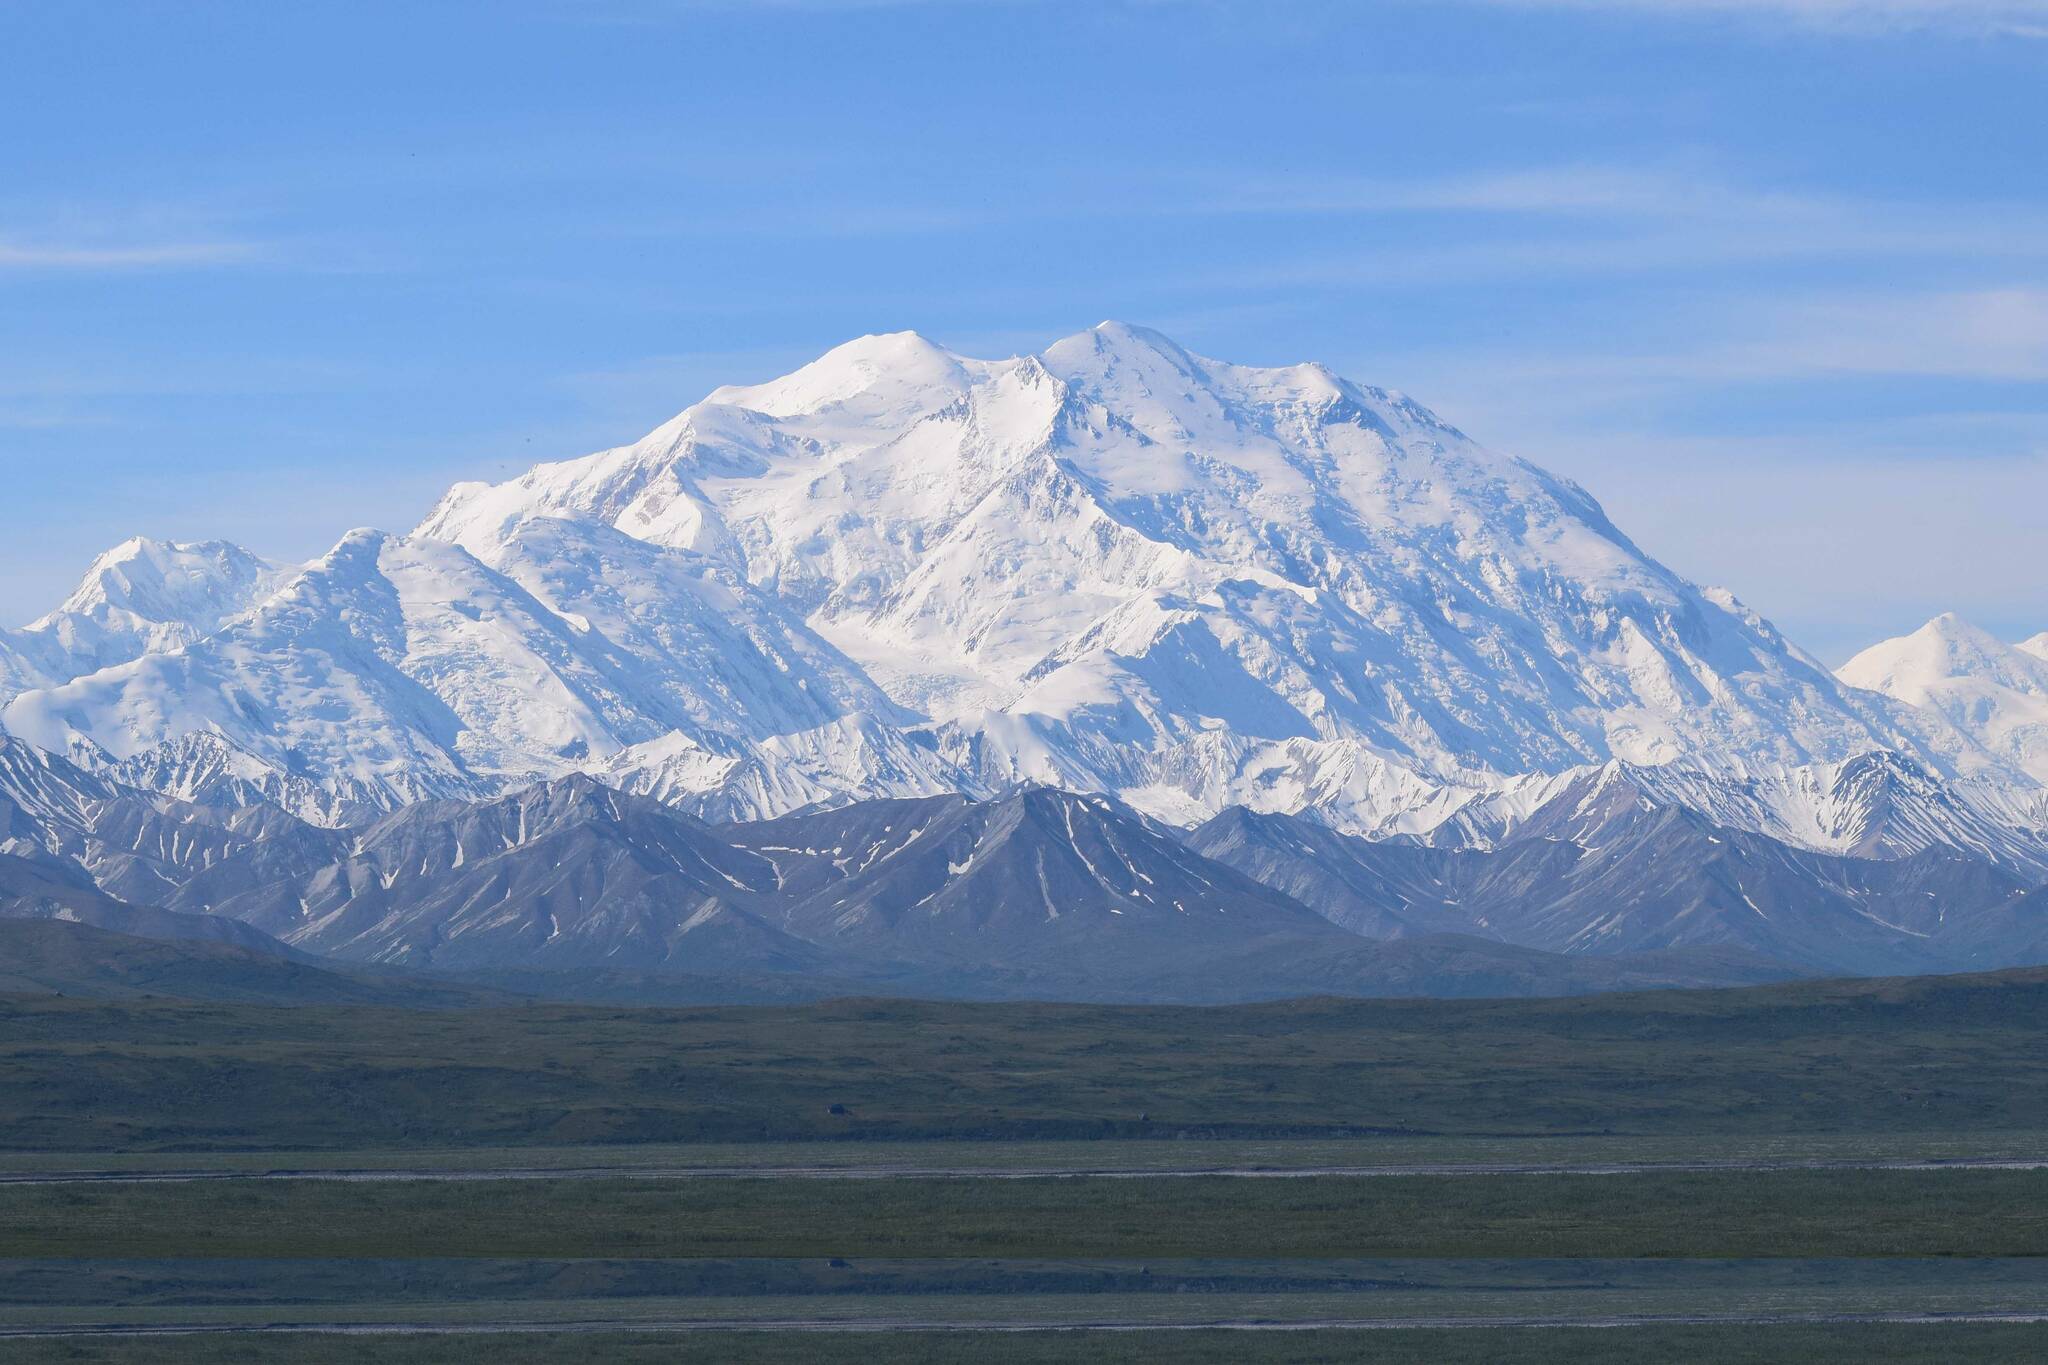 A recent photo of Denali, whose height was first calculated by Bradford Washburn at 20,320 feet. (Photo by David Merz)